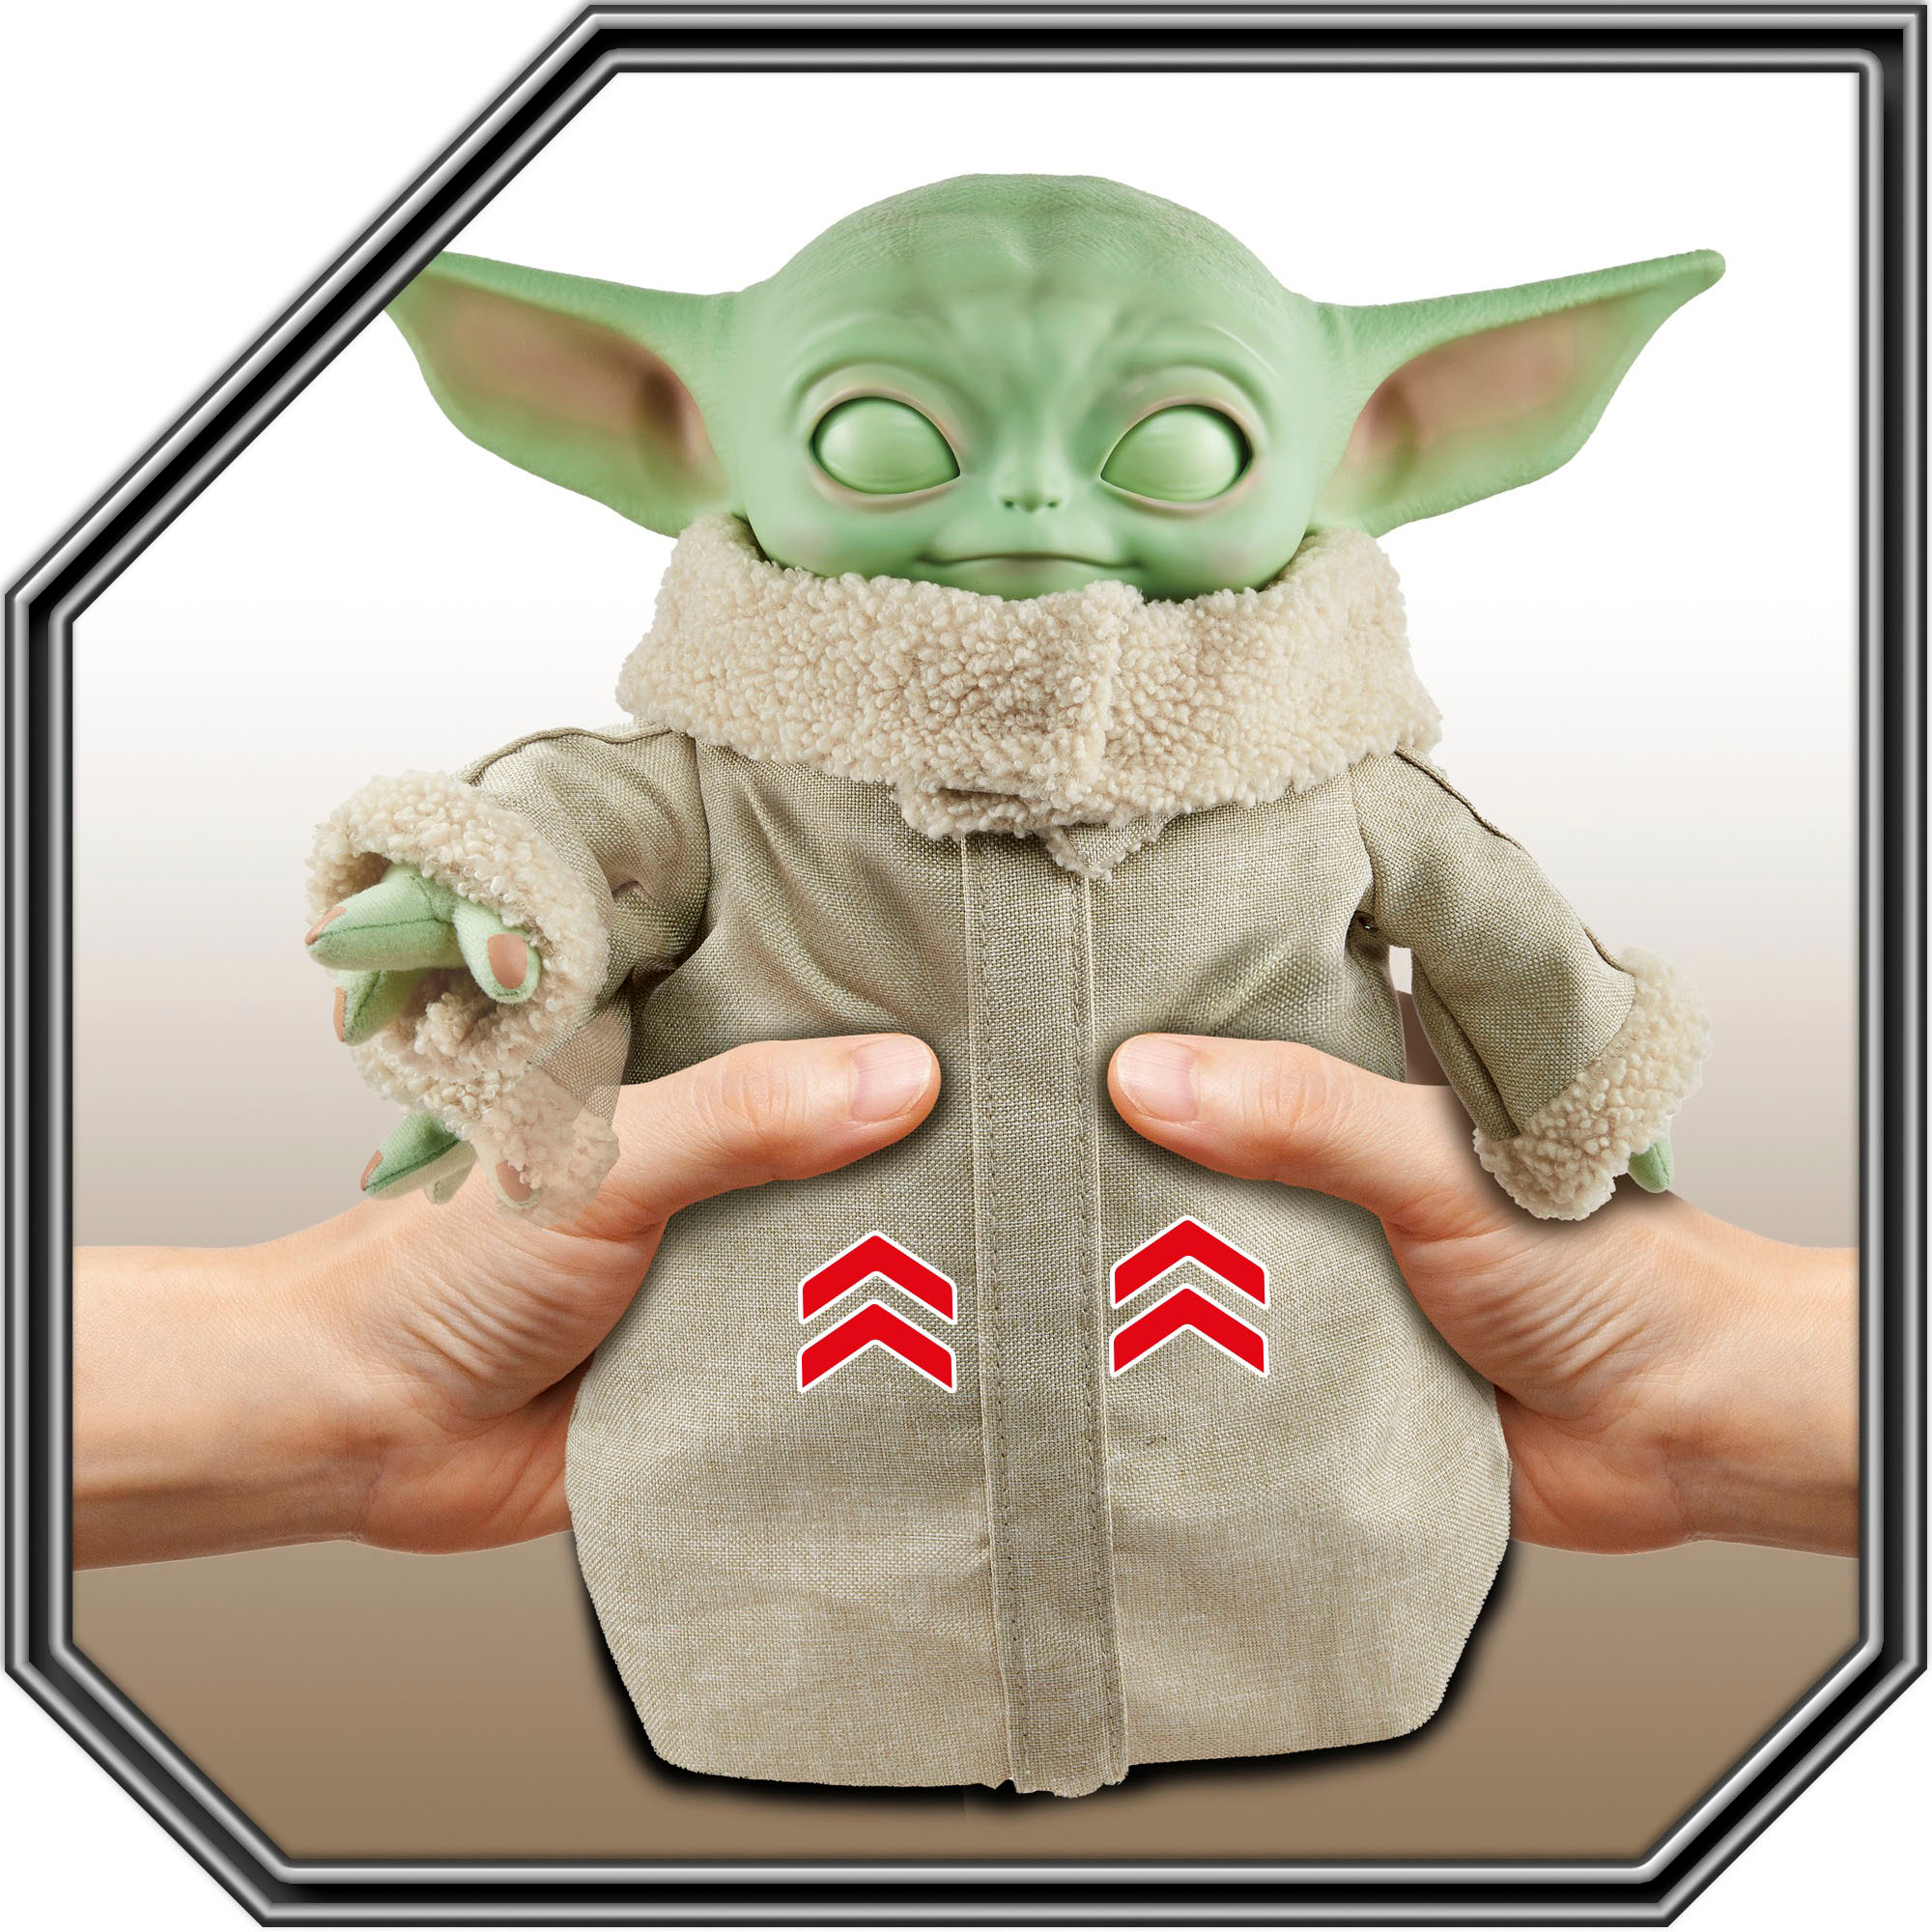 Star Wars Grogu Baby Yoda Plush Toy, 11-in The Child From The